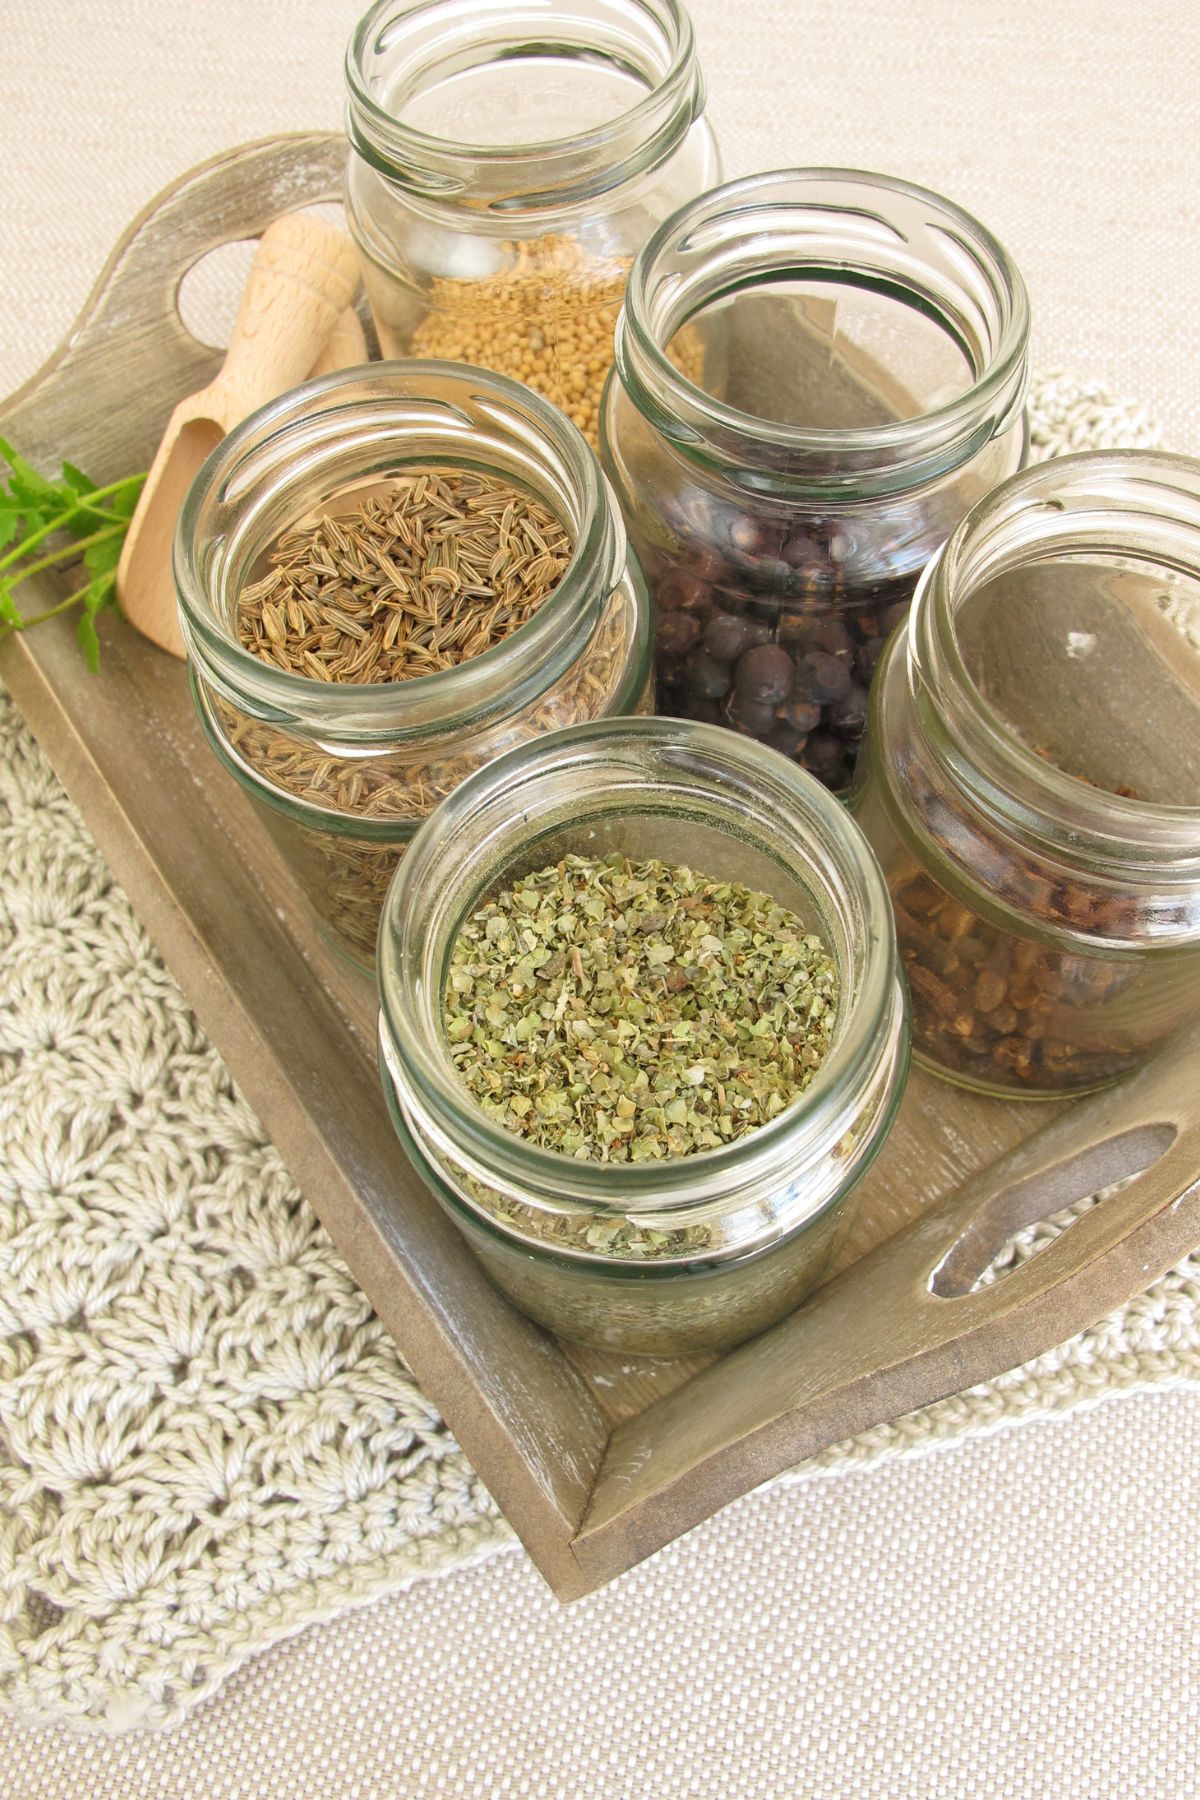 dried herbs and spices on table.